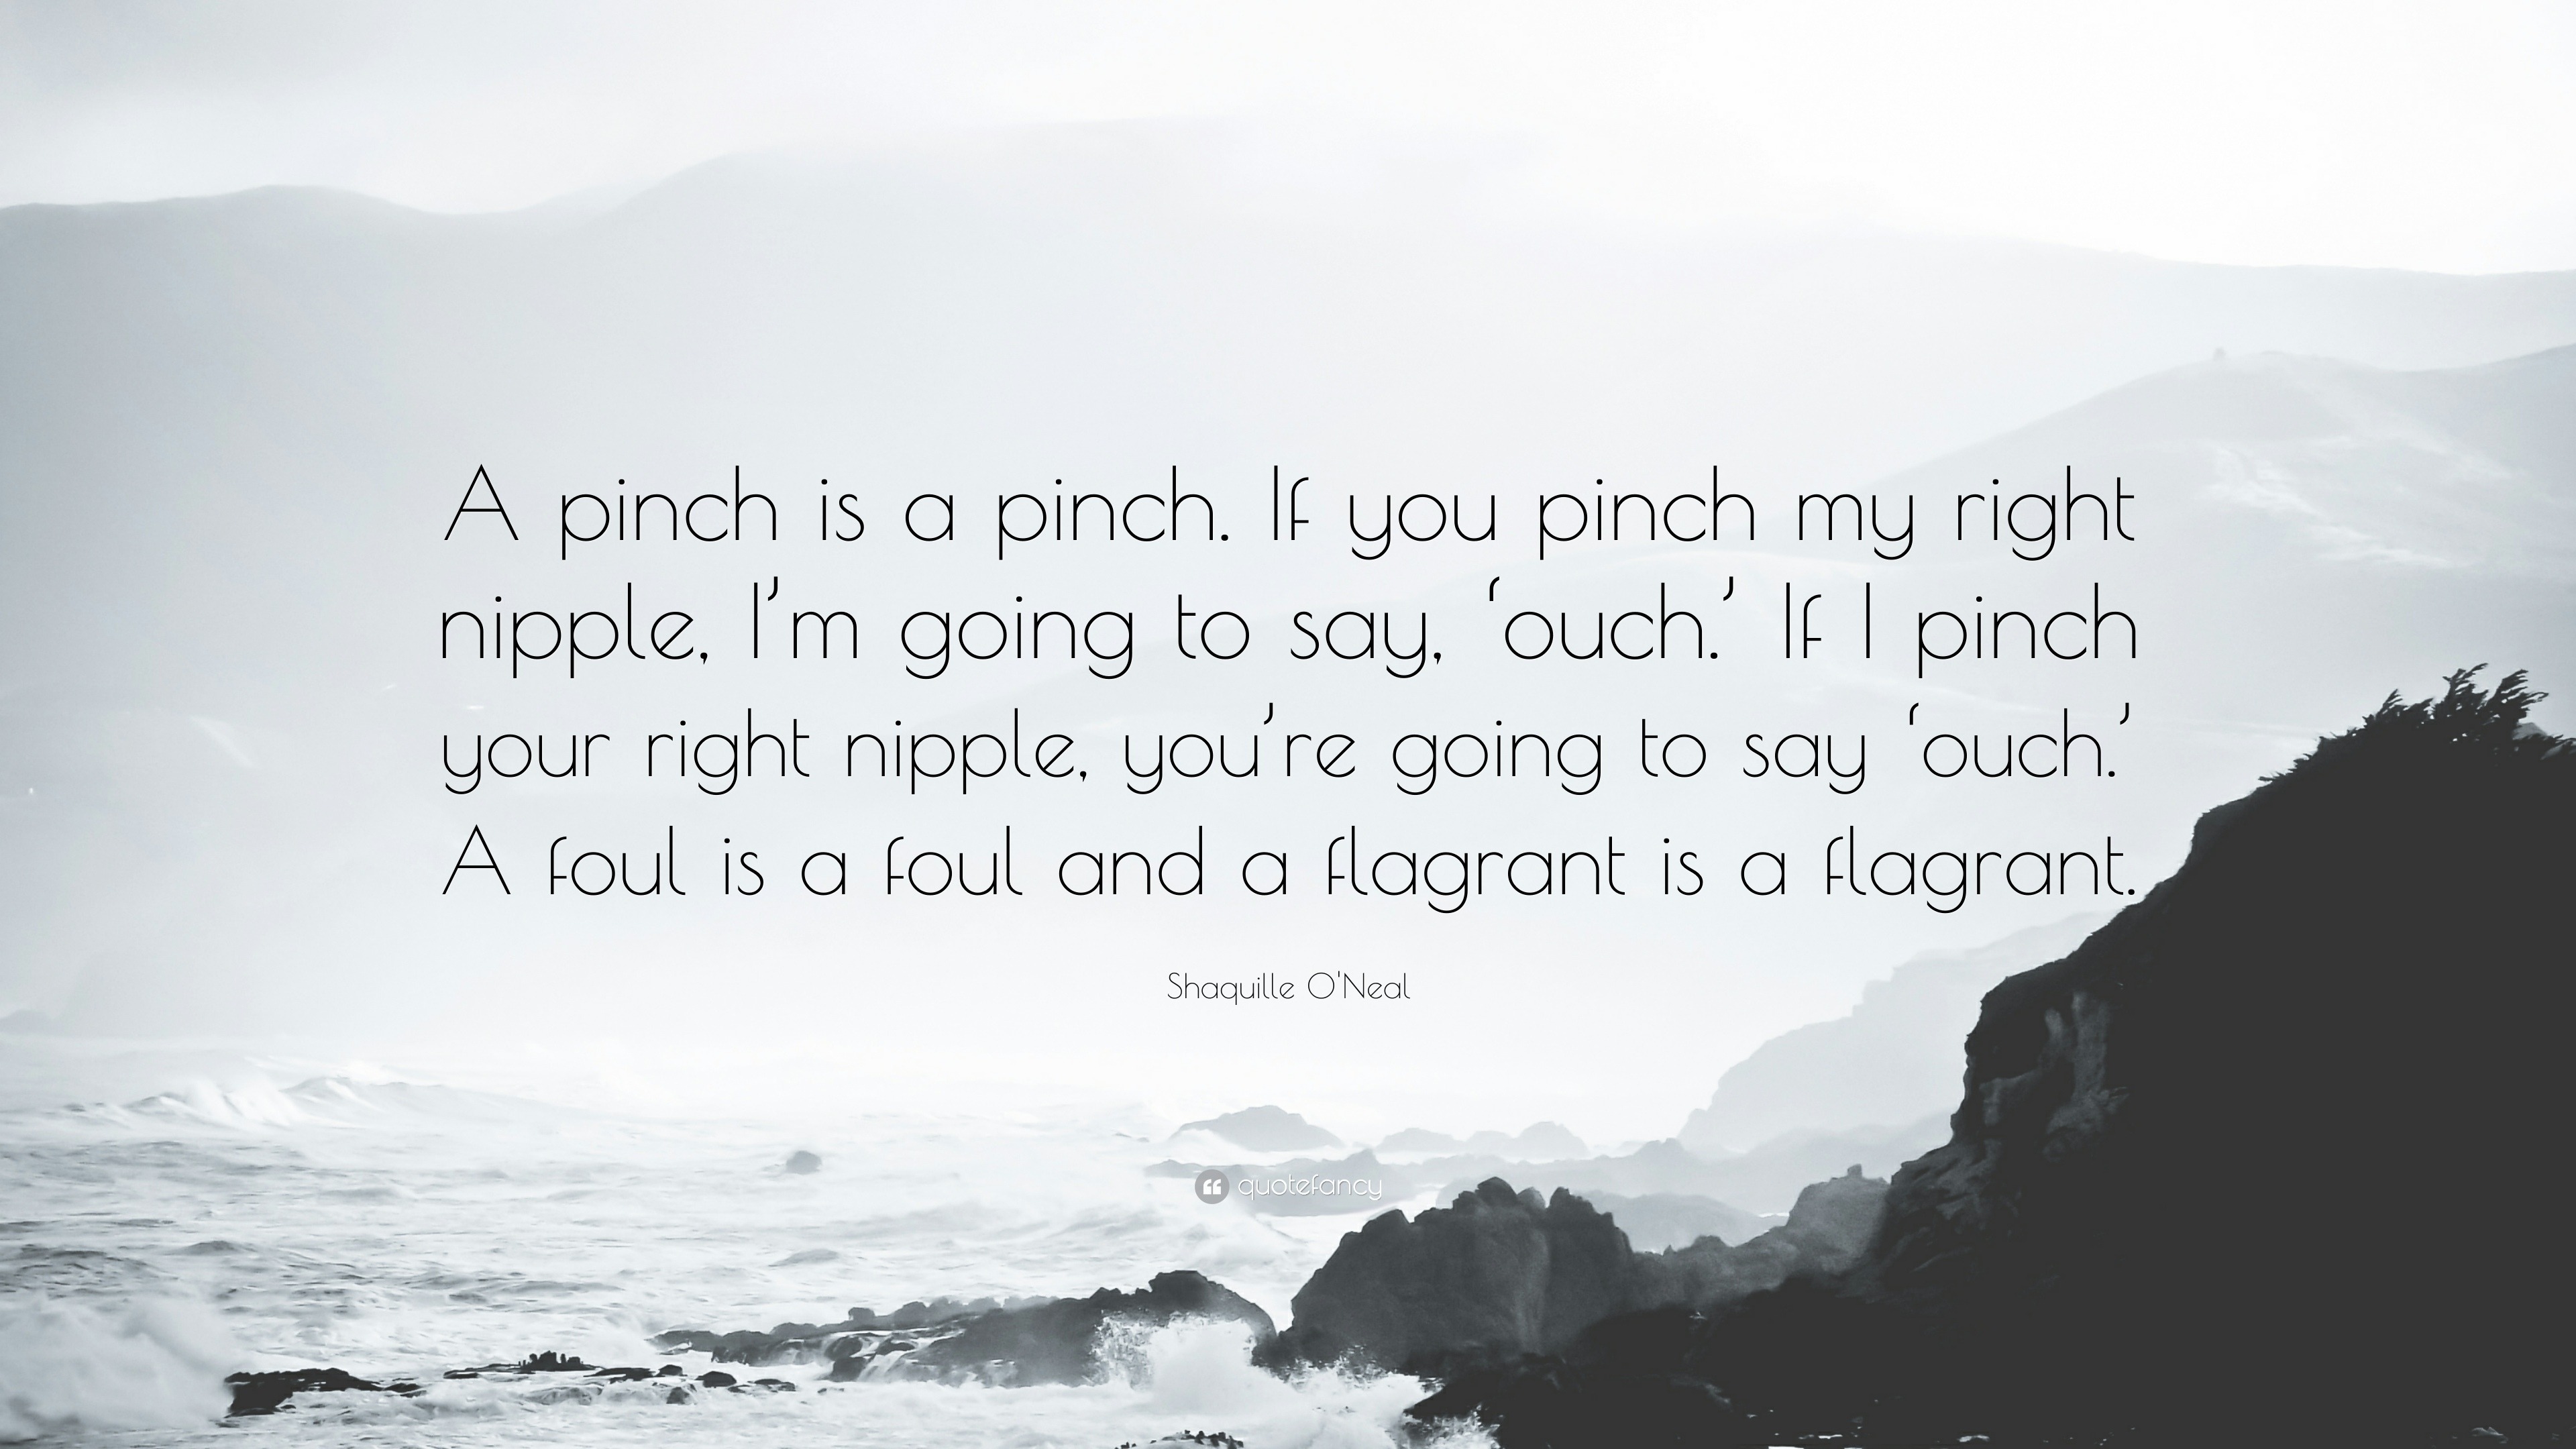 Shaquille O'Neal Quote: “A pinch is a pinch. If you pinch my right